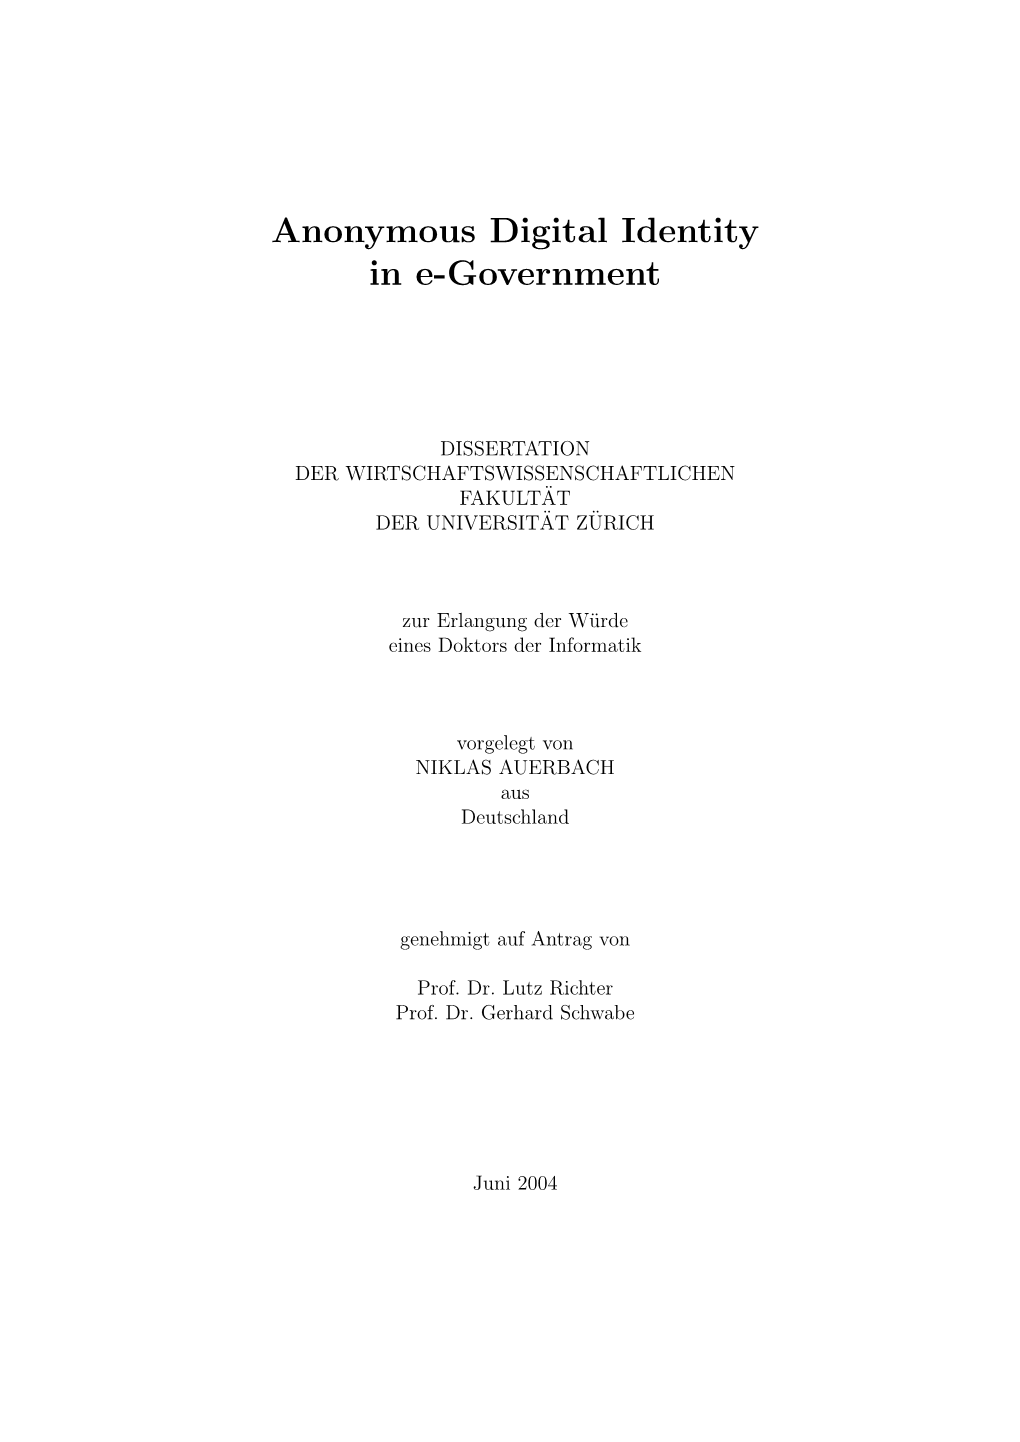 Anonymous Digital Identity in E-Government